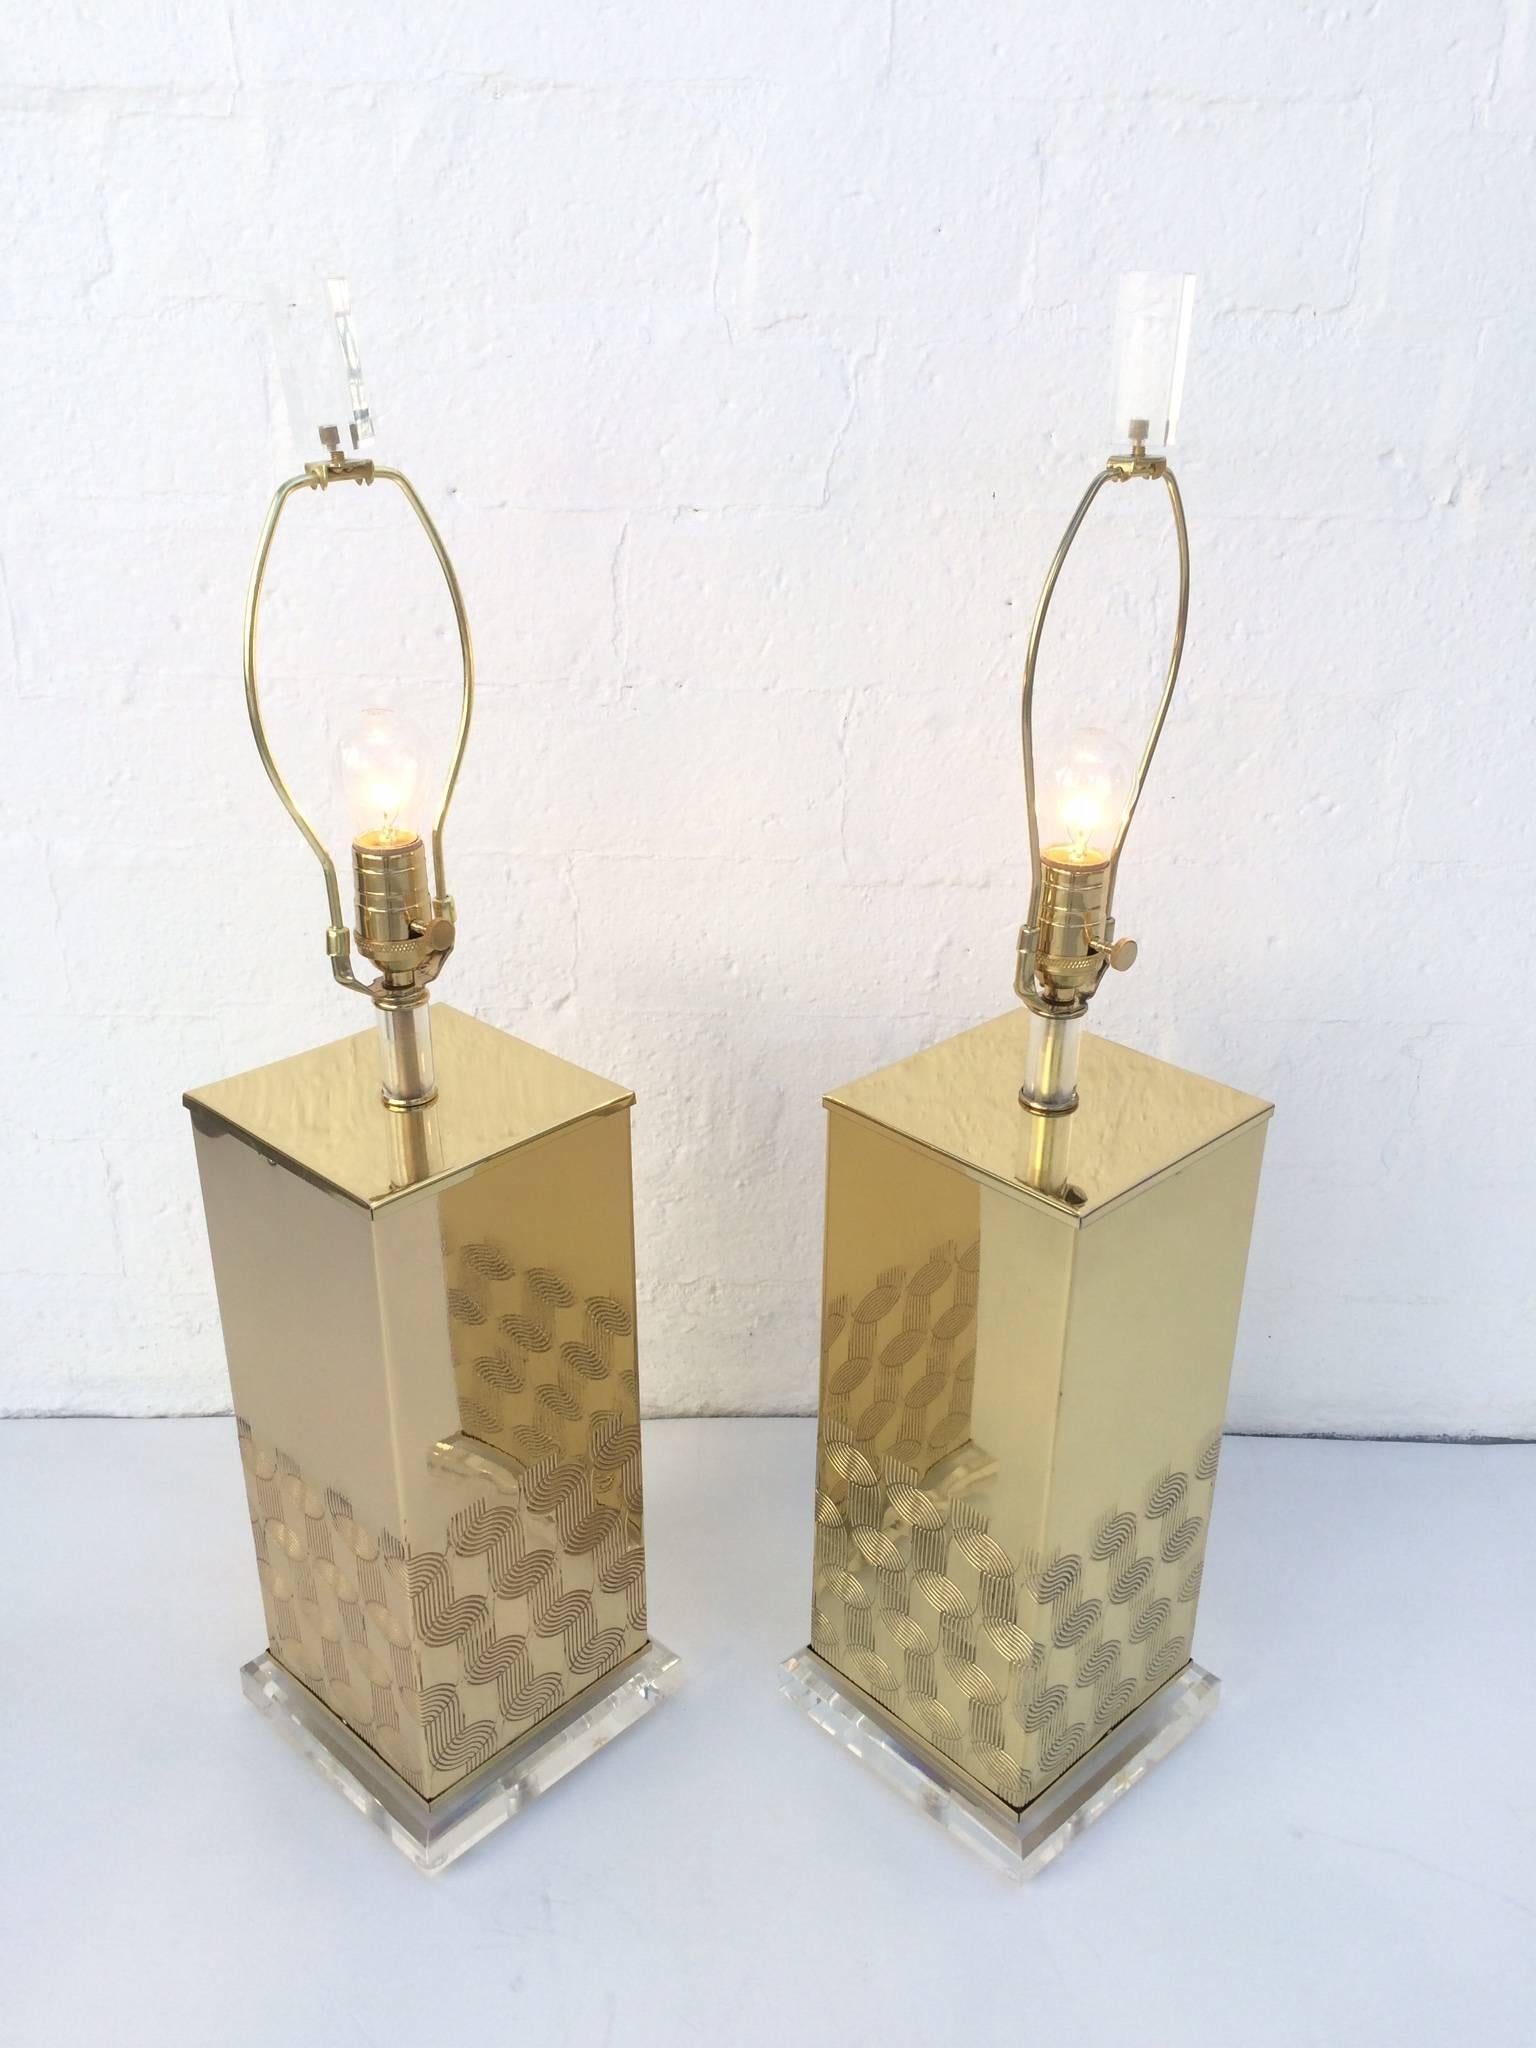 Polished Brass and Acrylic Table Lamps In Excellent Condition For Sale In Palm Springs, CA